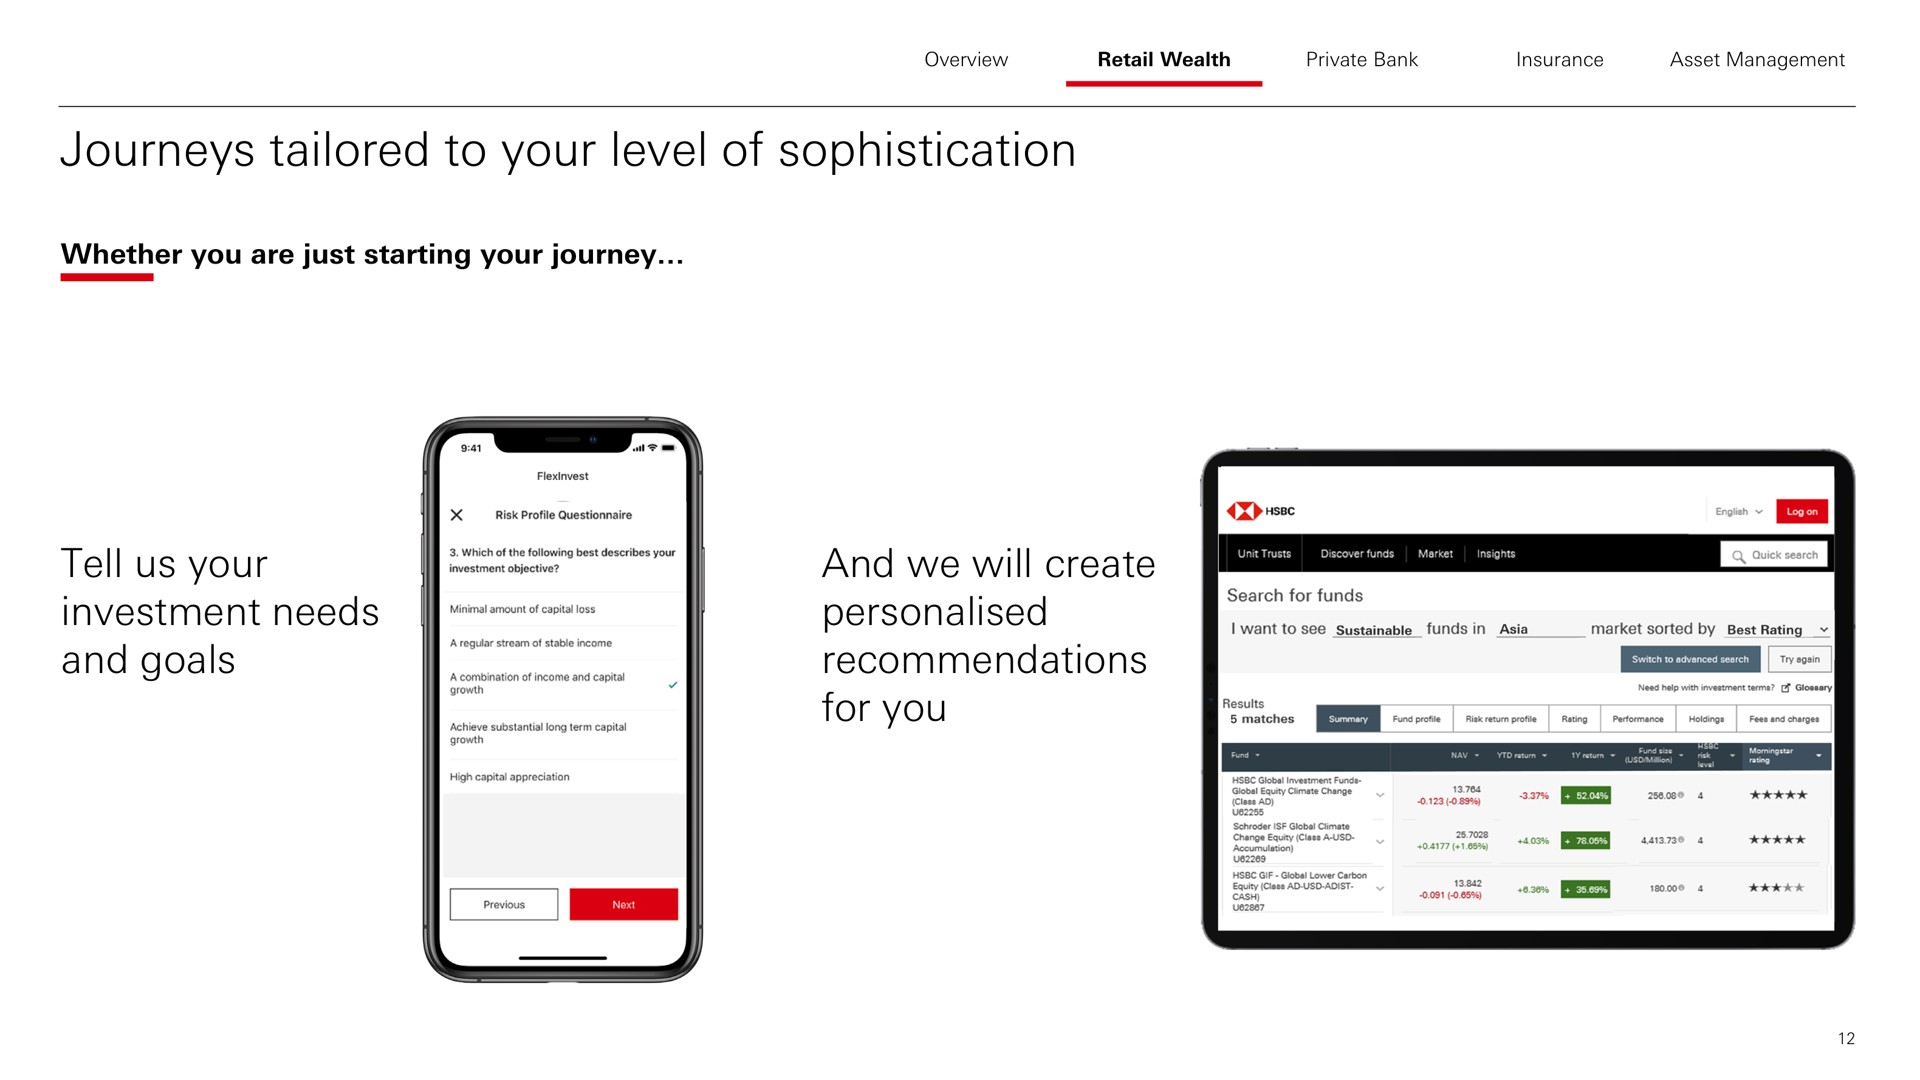 journeys tailored to your level of sophistication tell us your investment needs and goals and we will create recommendations for you worsen | HSBC